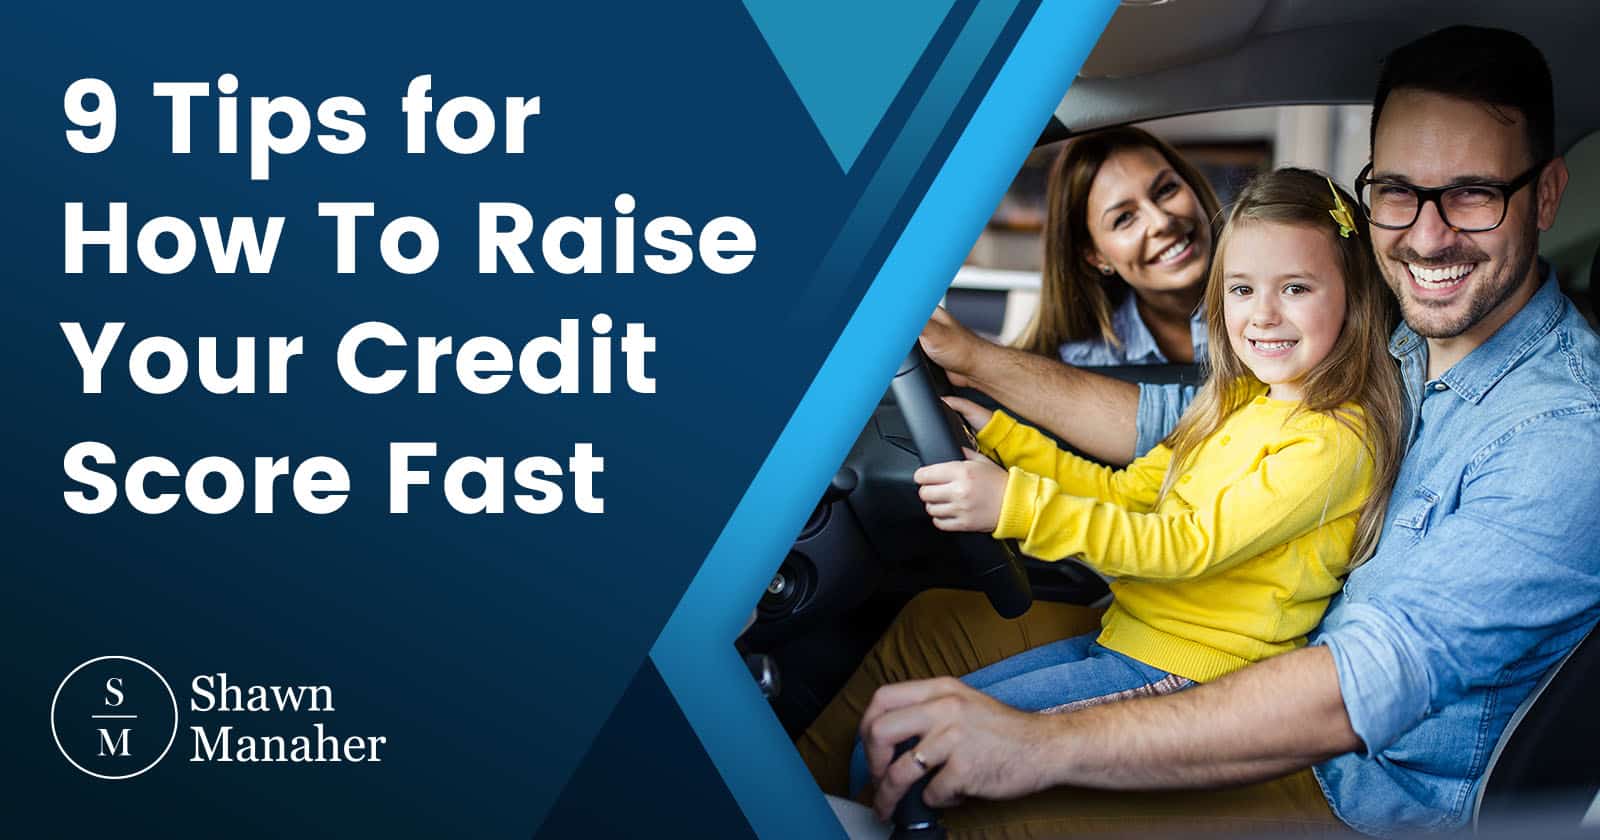 how to raise your credit score